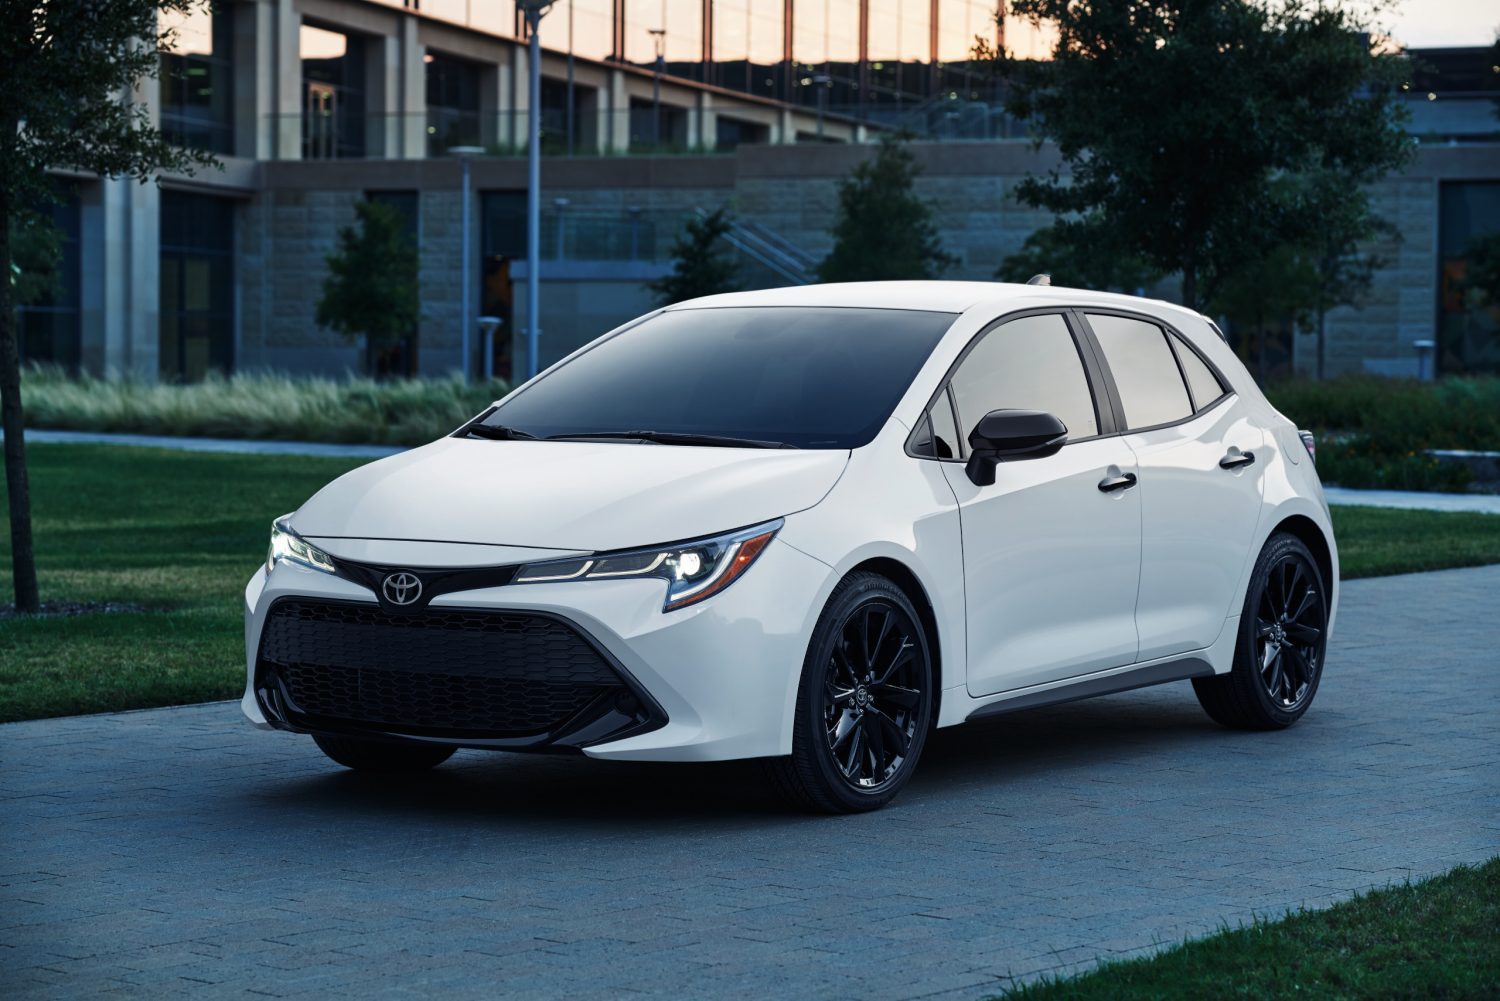 Toyota Corolla Hatchback XII, car in the us, car specs, cars models, vehicle model